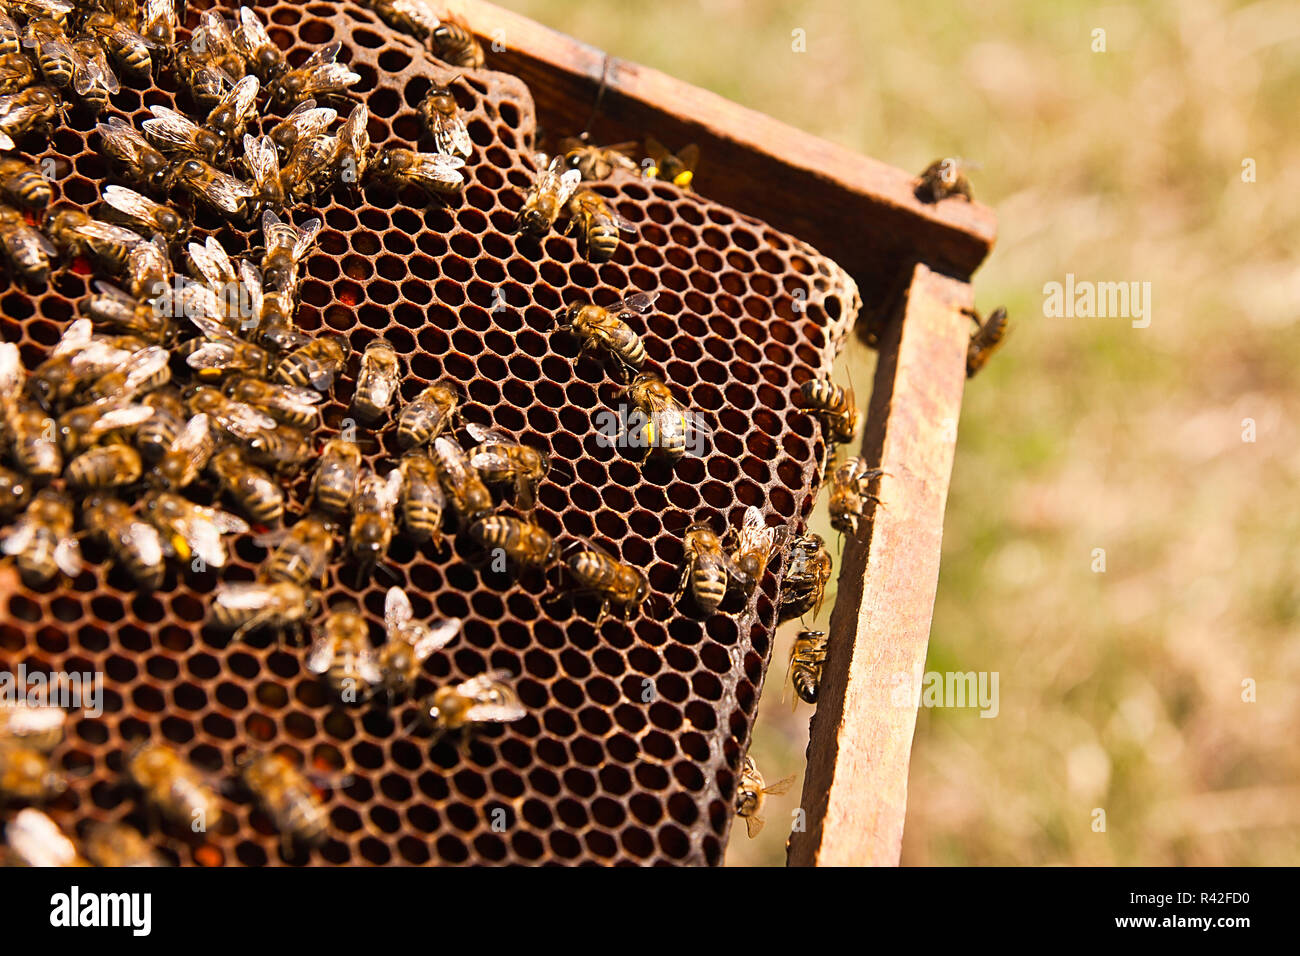 Busy bees, close up view of the working bees on honeycomb. Stock Photo